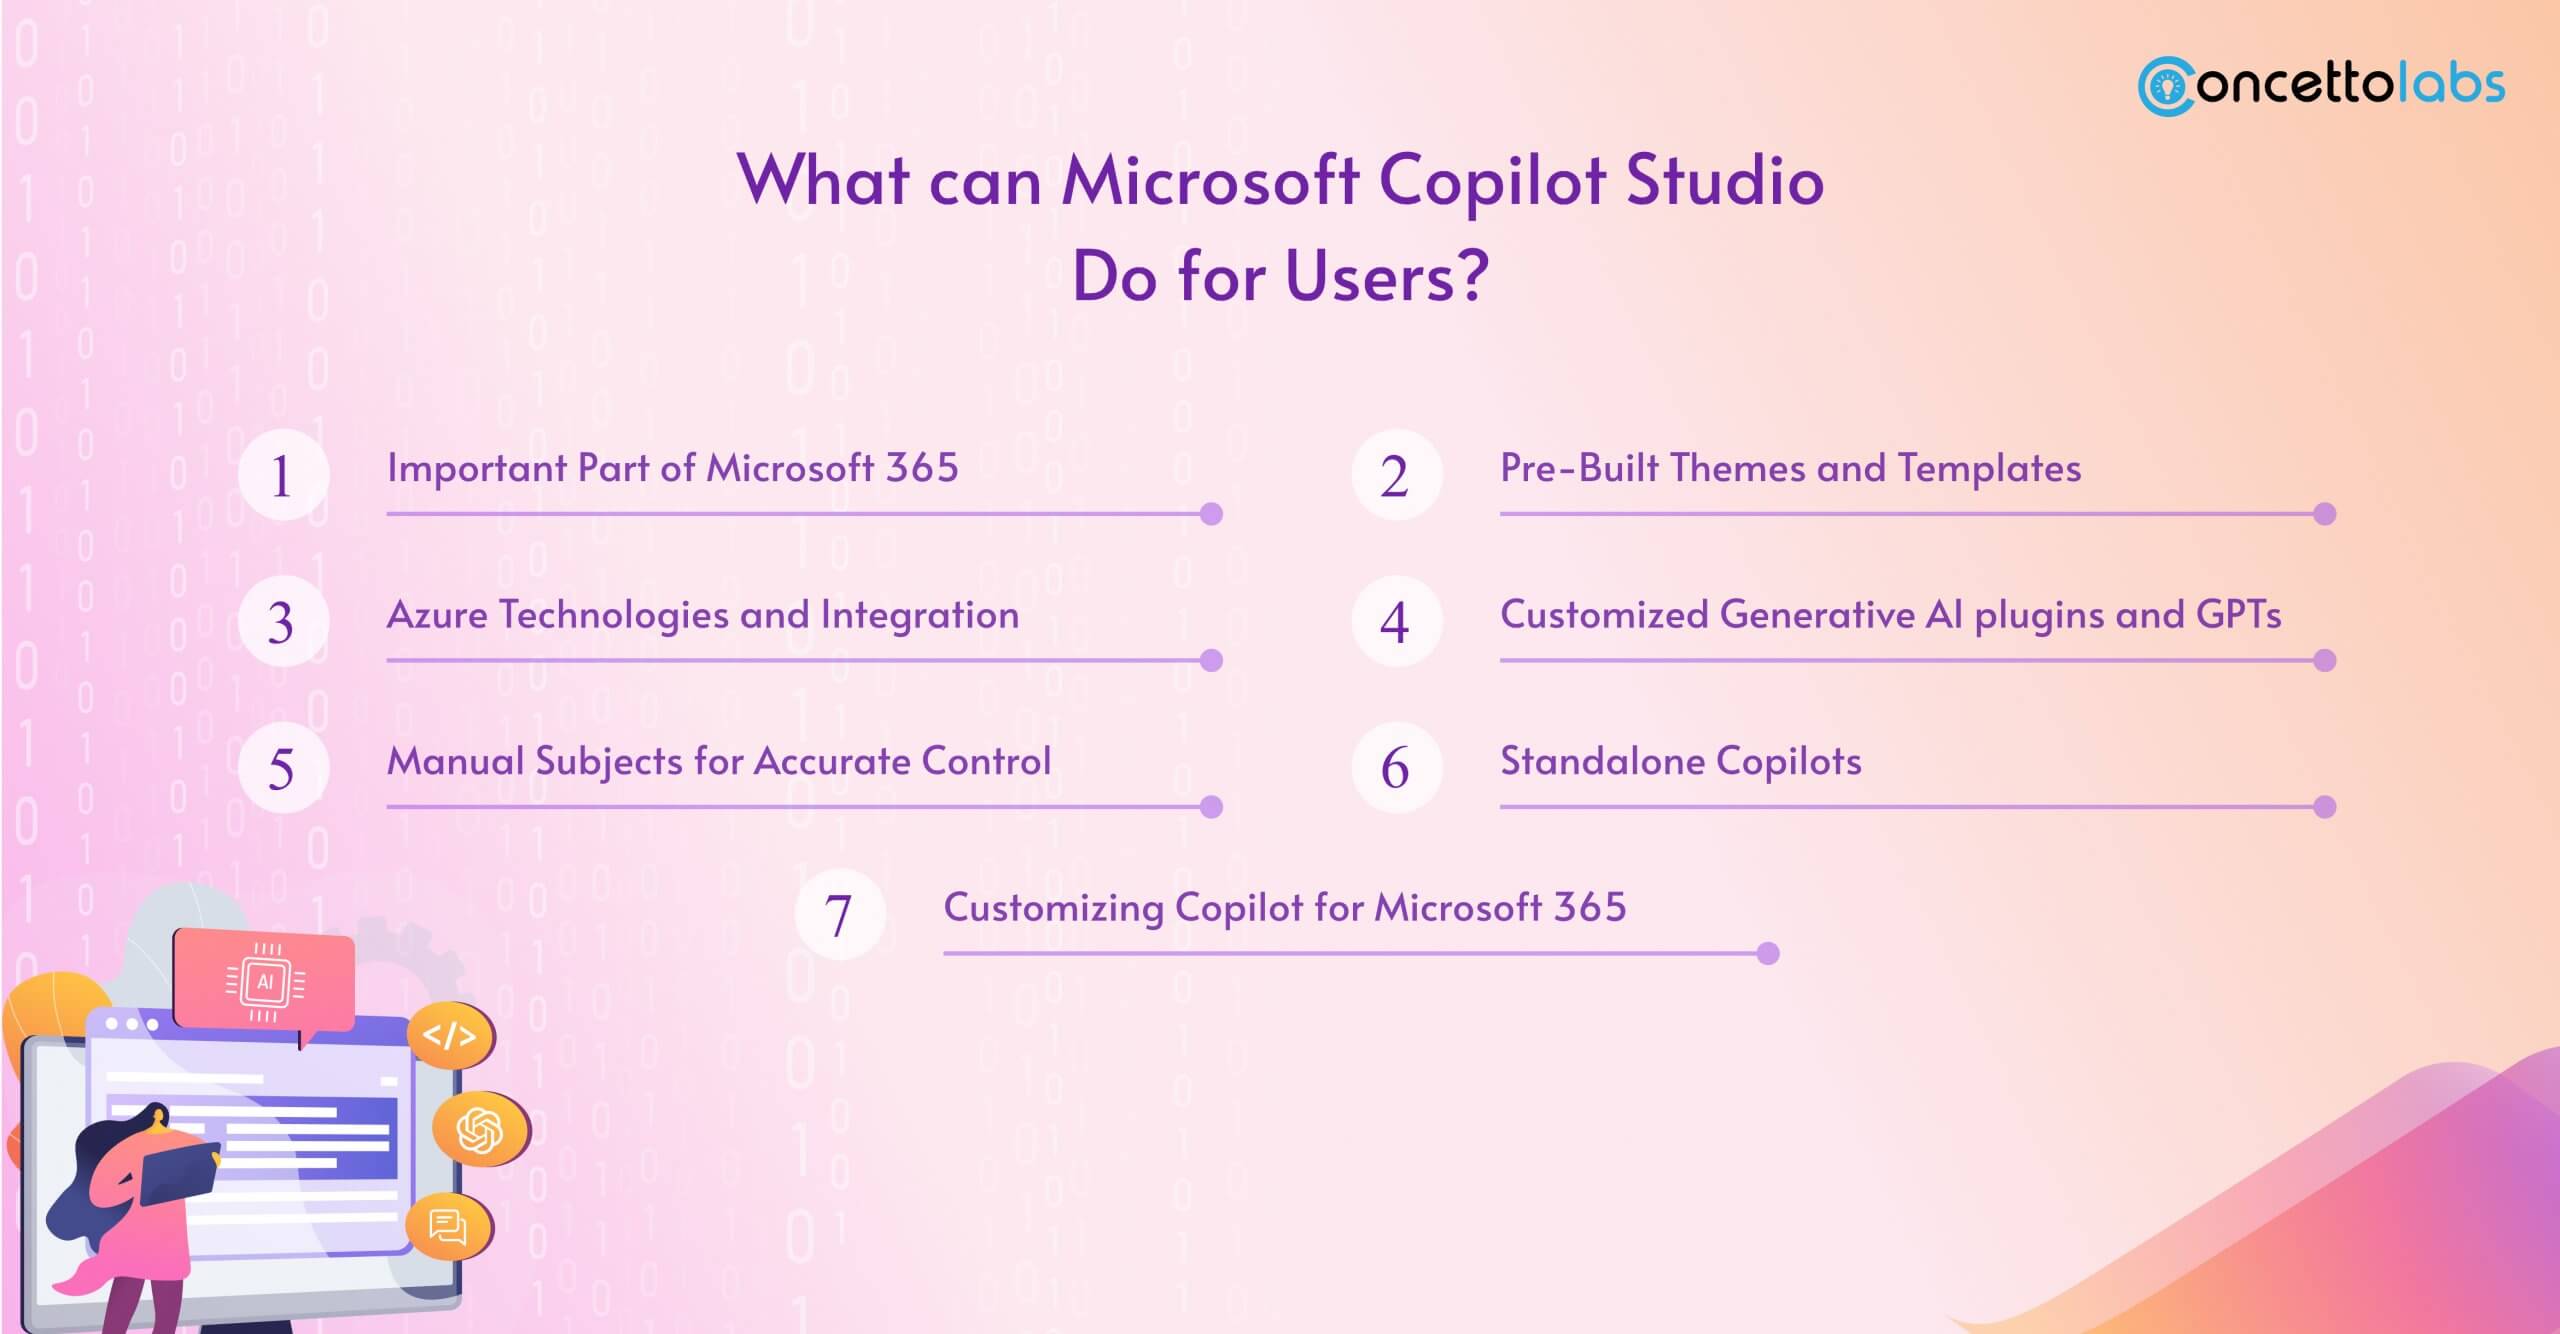 What Can Microsoft Copilot Studio Do for Users?